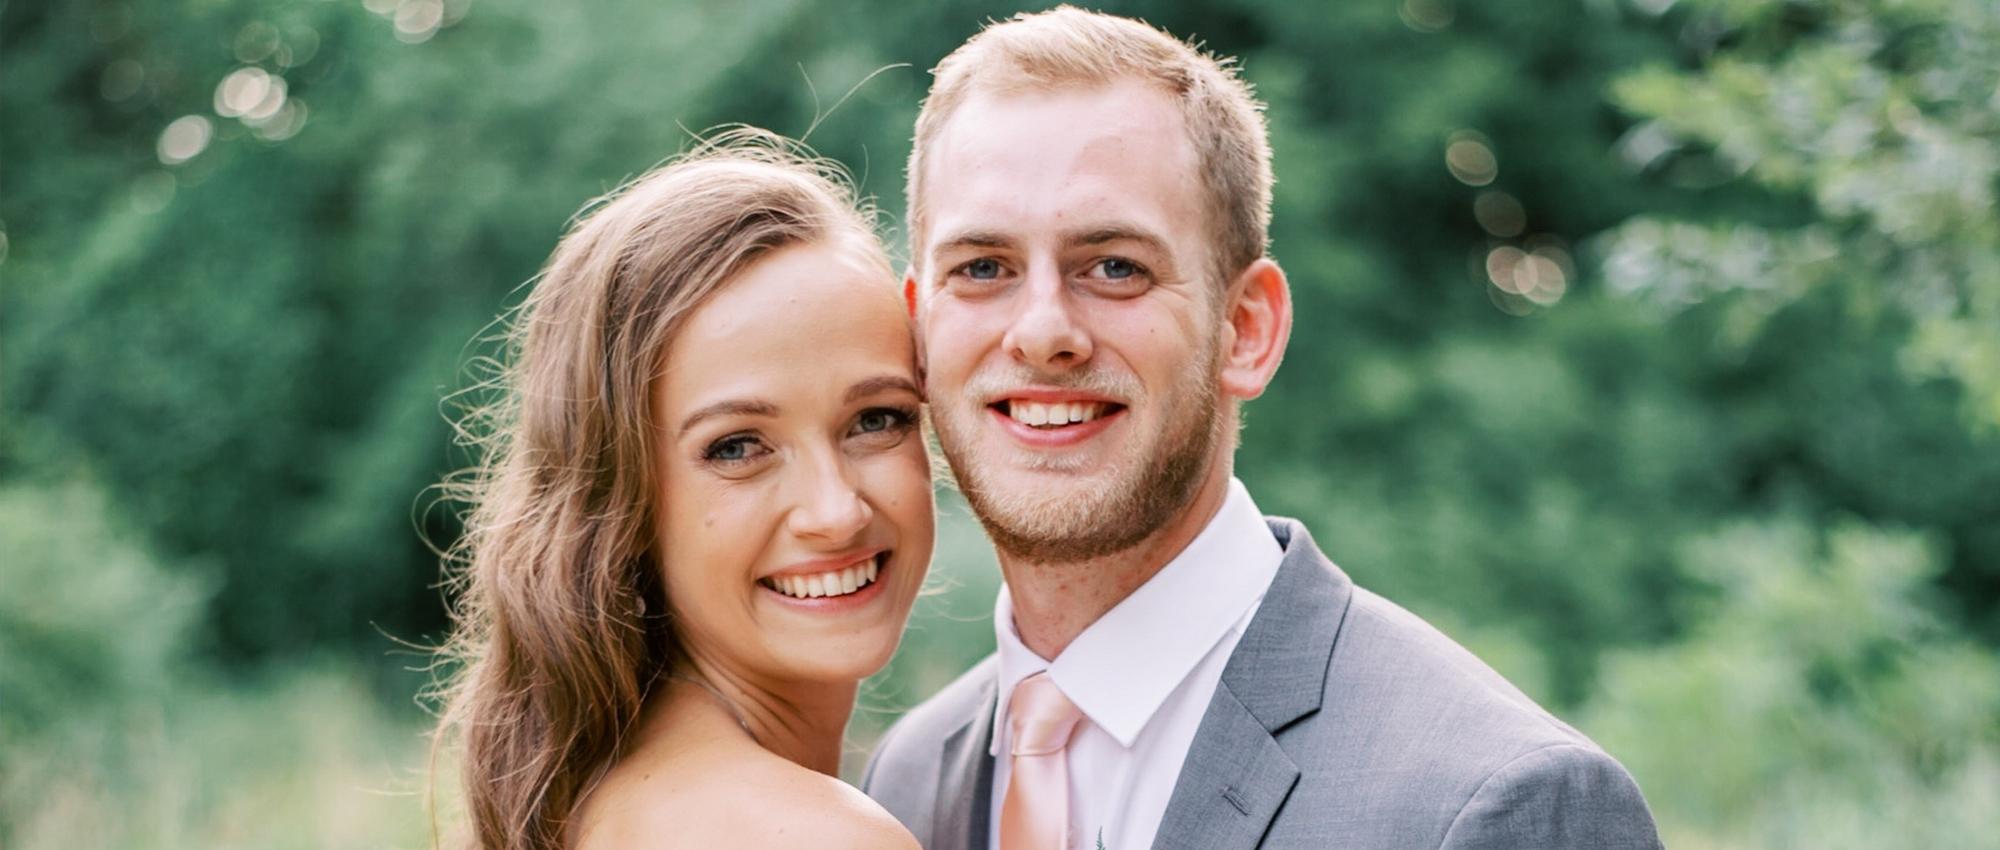  Stem cell donor Jason and blood donor Sierra Kooy hug each other on their wedding day. Jason attended one of many stem cell swab events that happen each year in Canada, and it put him on a path to marry Sierra.